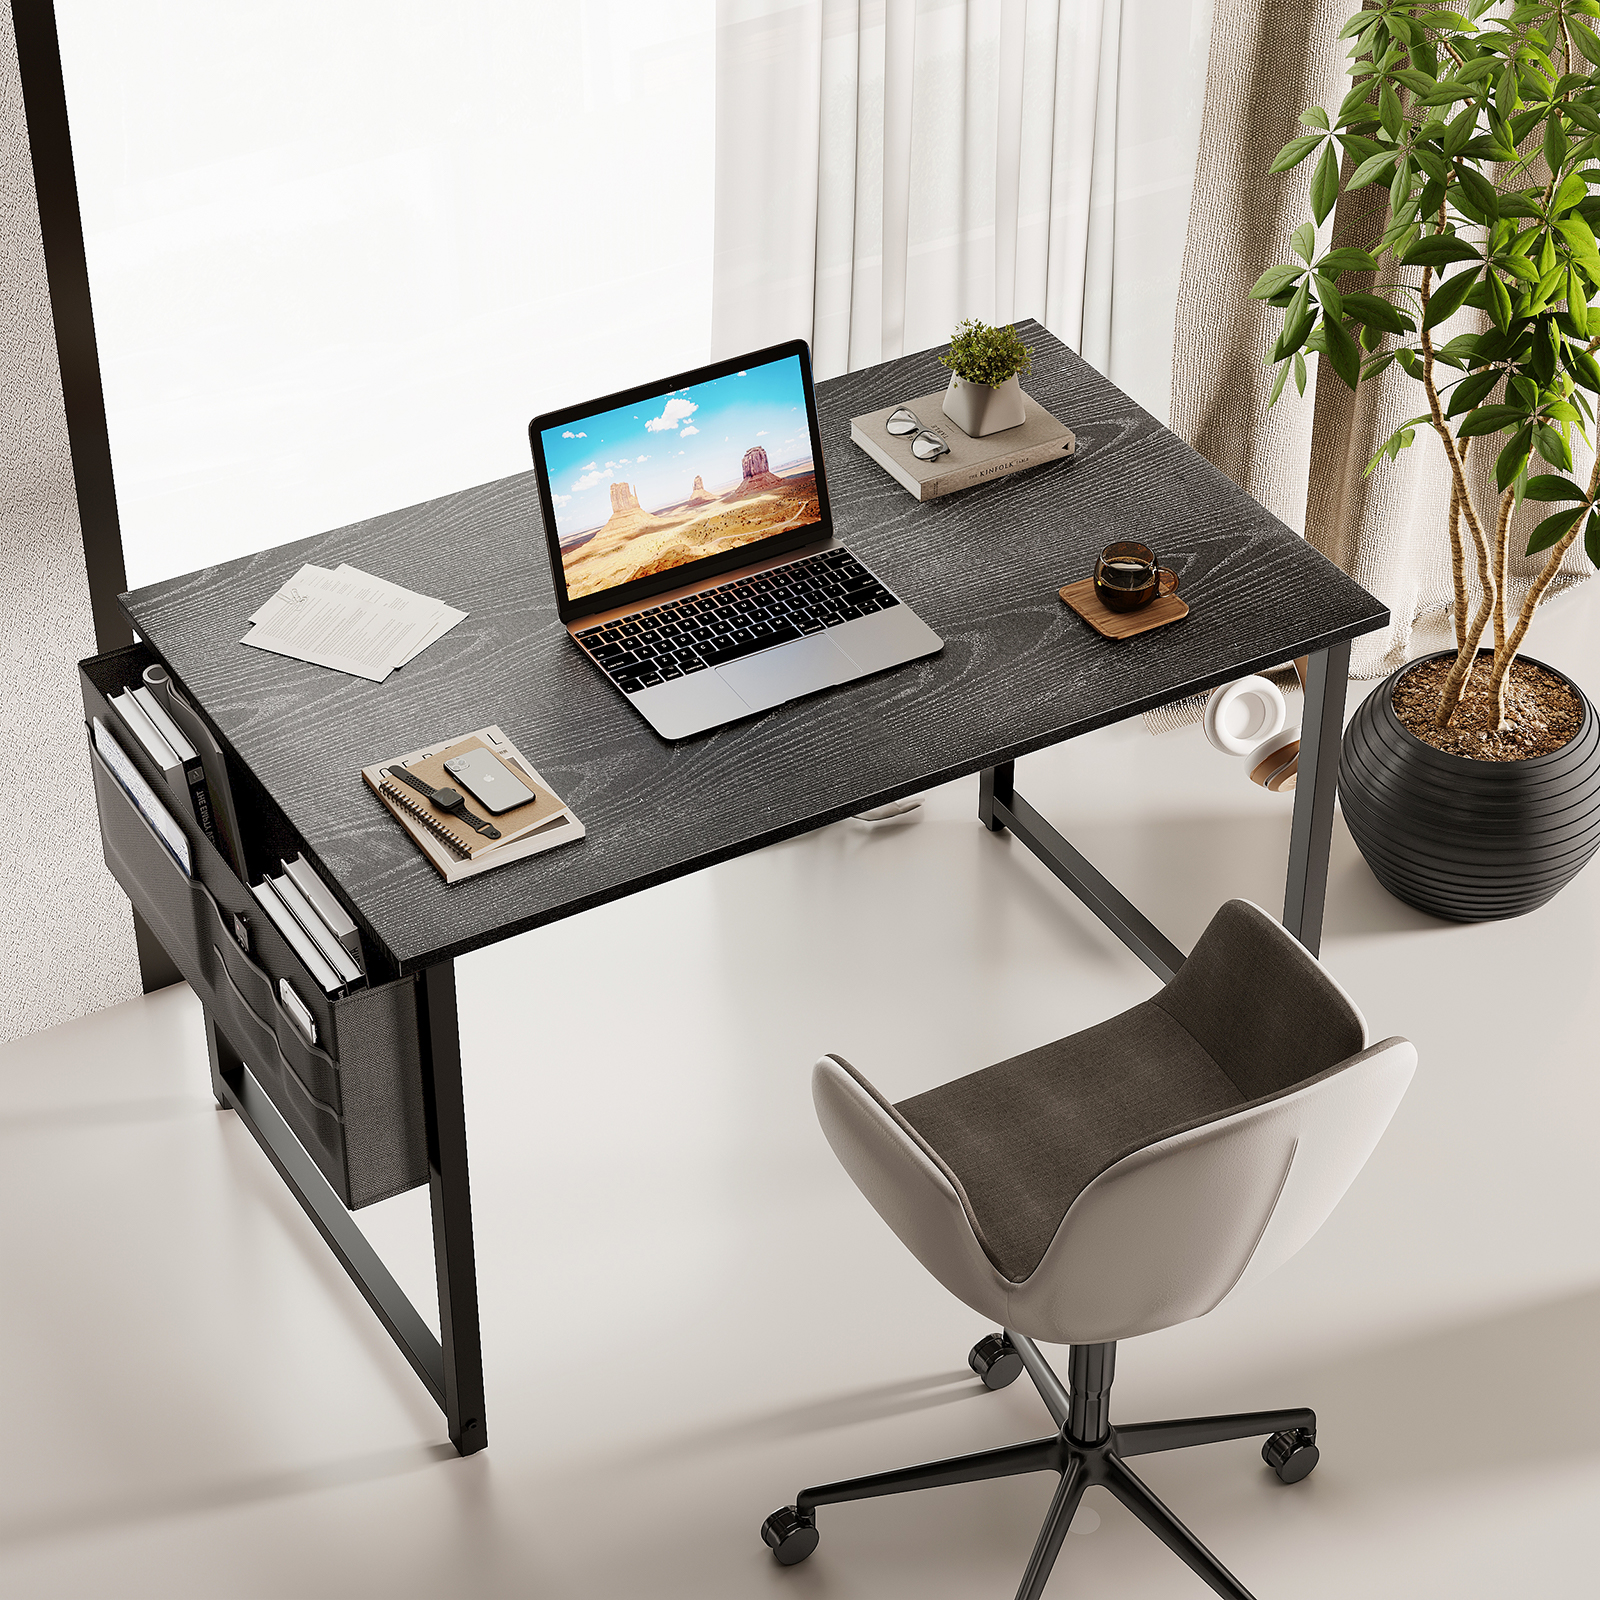 Computer Writing Desk 40 inch, Sturdy Home Office Table, Work Desk with a Storage Bag and Headphone Hook, Espresso Gray - image 1 of 6